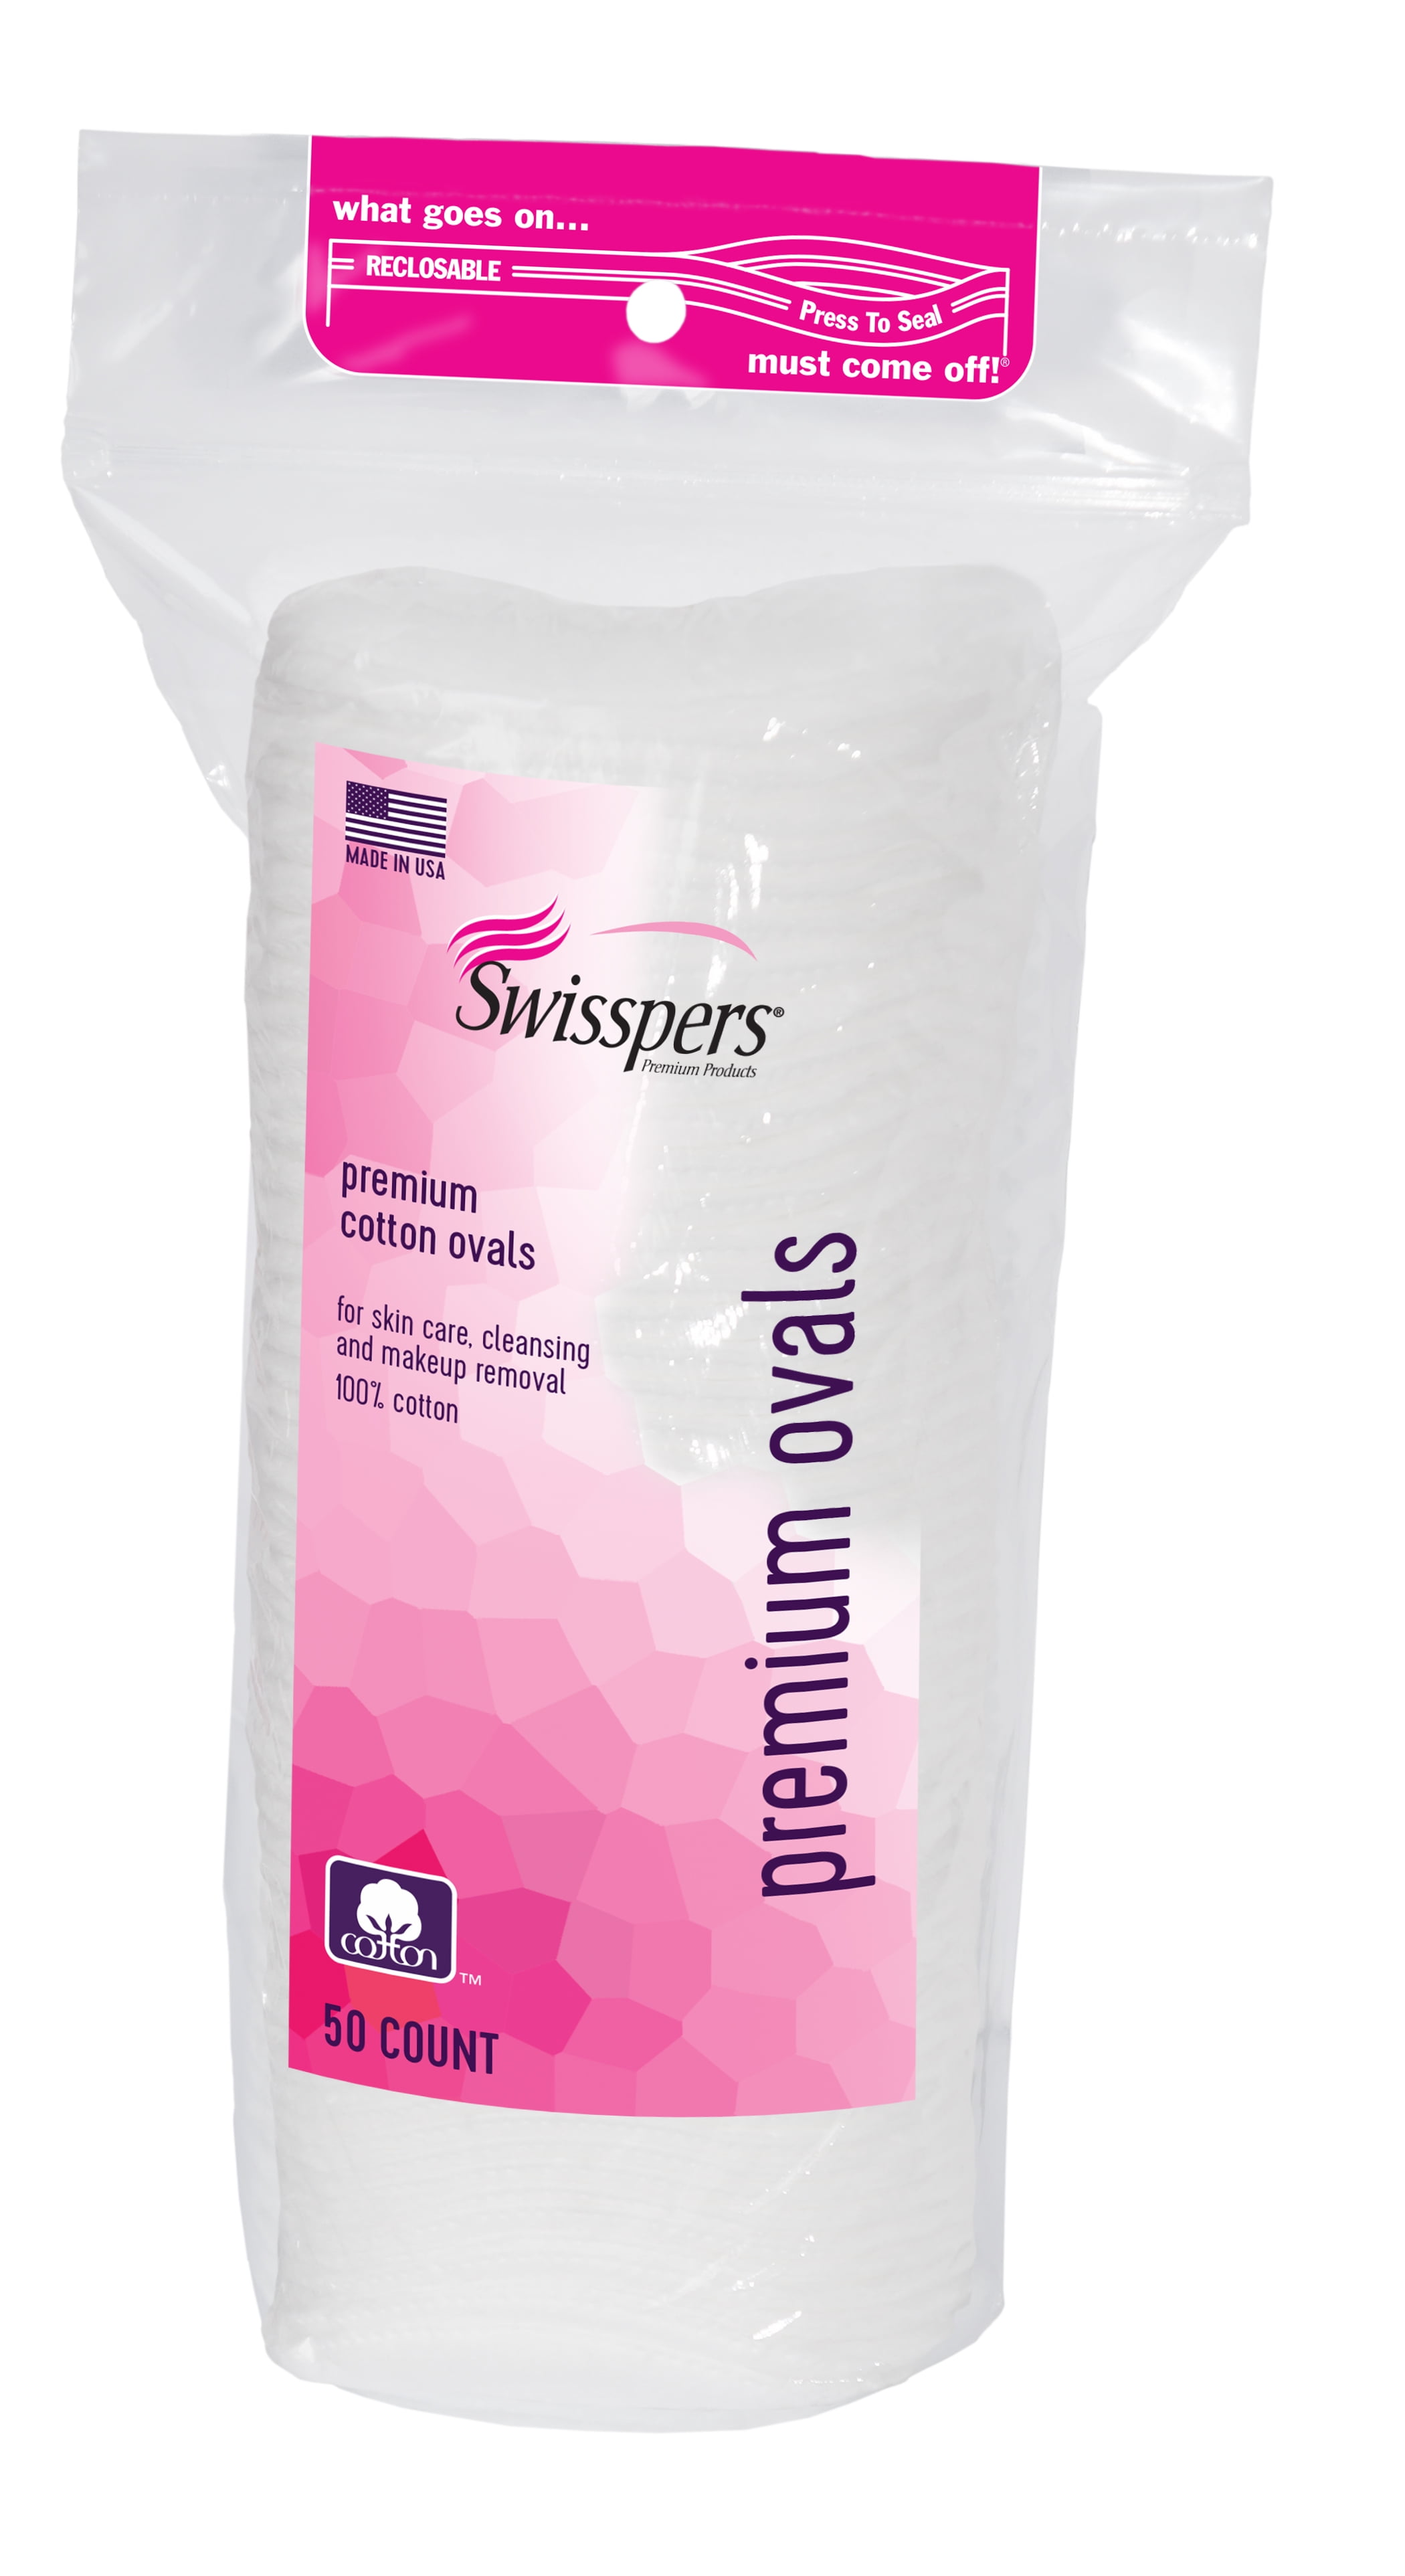 Swisspers Premium White Cotton Oval Pads with Stitched Edge, 50 Count